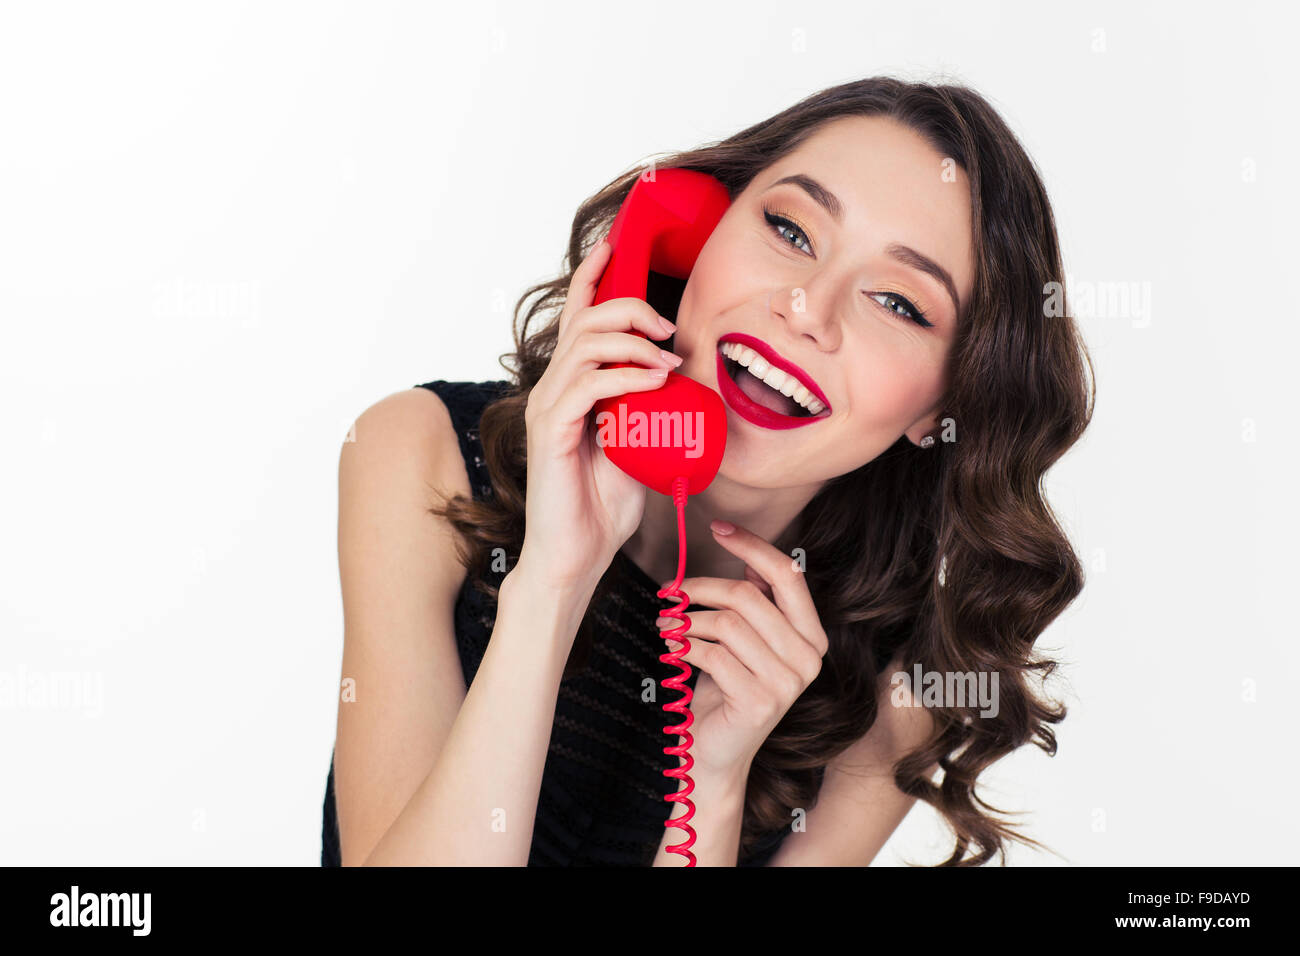 Cheerful attractive curly retro styled young woman talking on red telephone isolated over white background Stock Photo